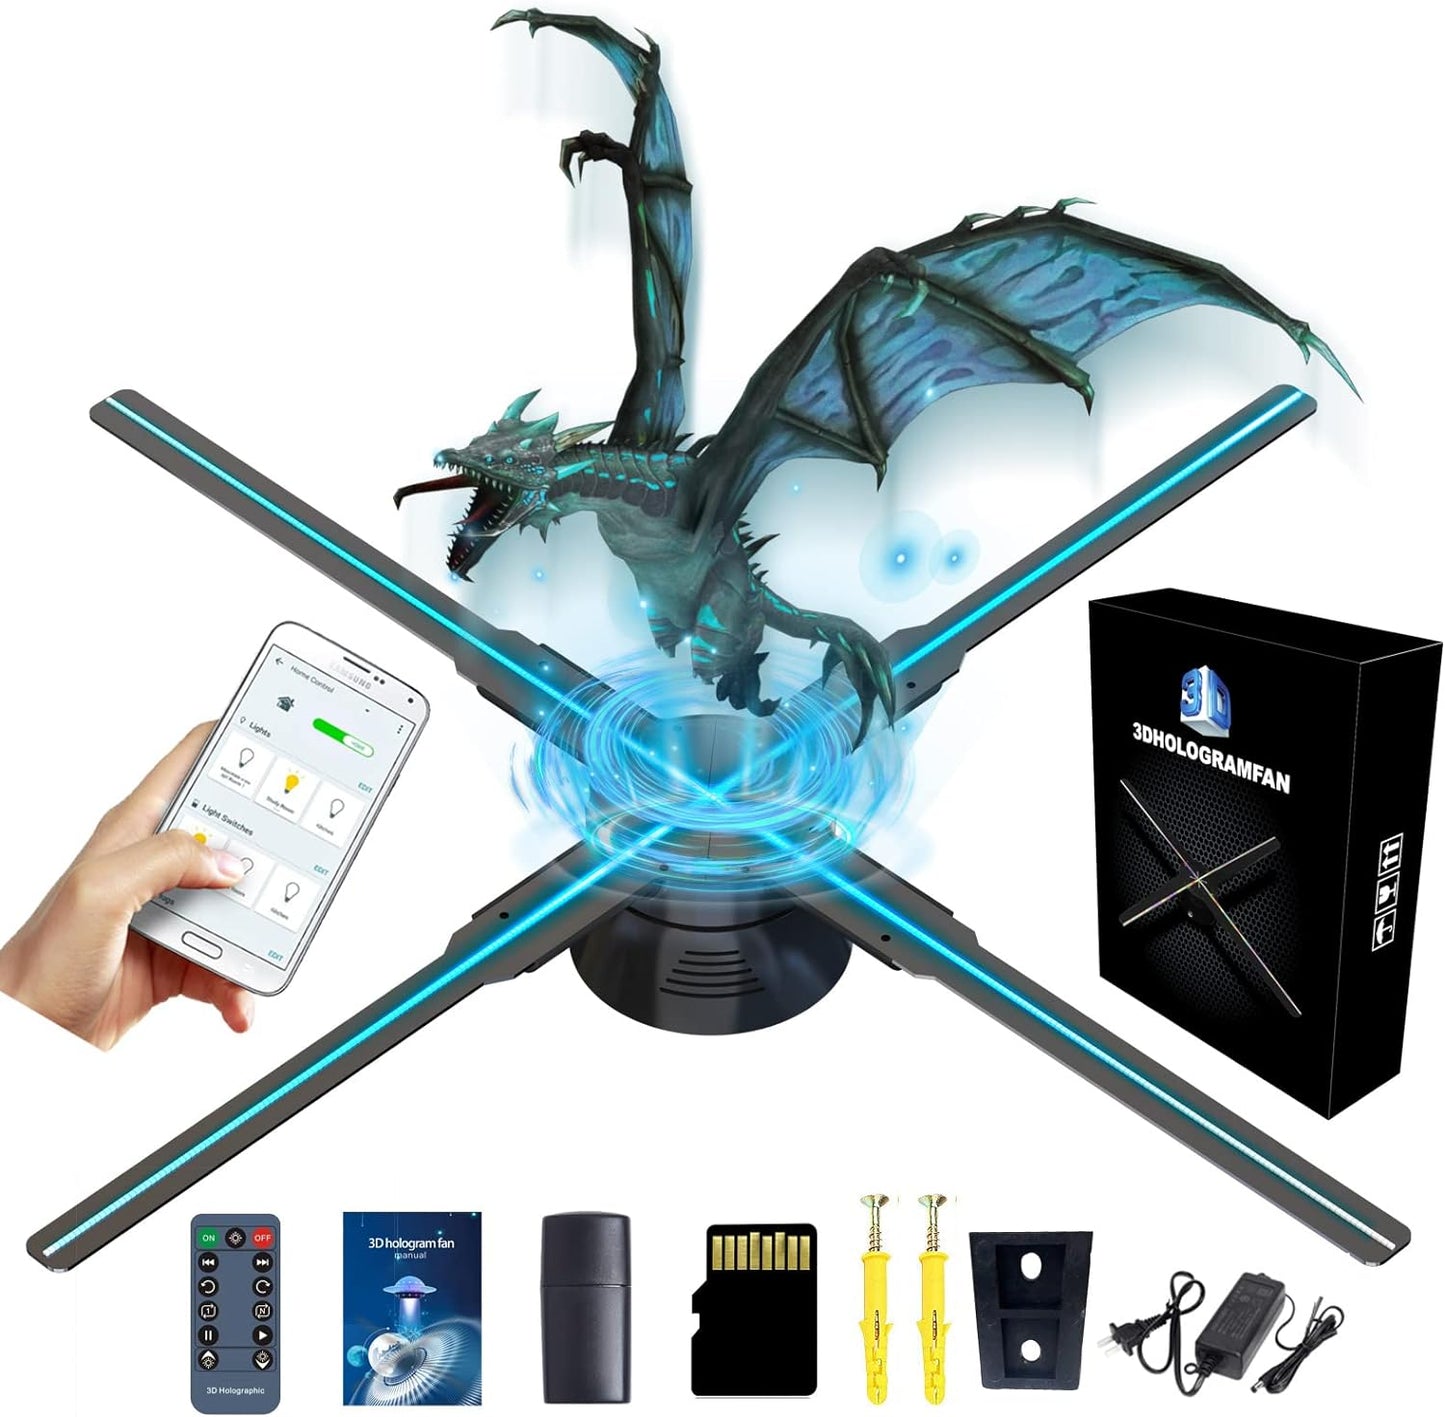 3D Hologram Fan, 18.1 Inch Hologram Fan Wifi Projector with 700 Video Library, Tabletop Holographic LED Ceiling Skylight Night Light for Halloween, Shop, Bar,Casino, Party Advertising Display